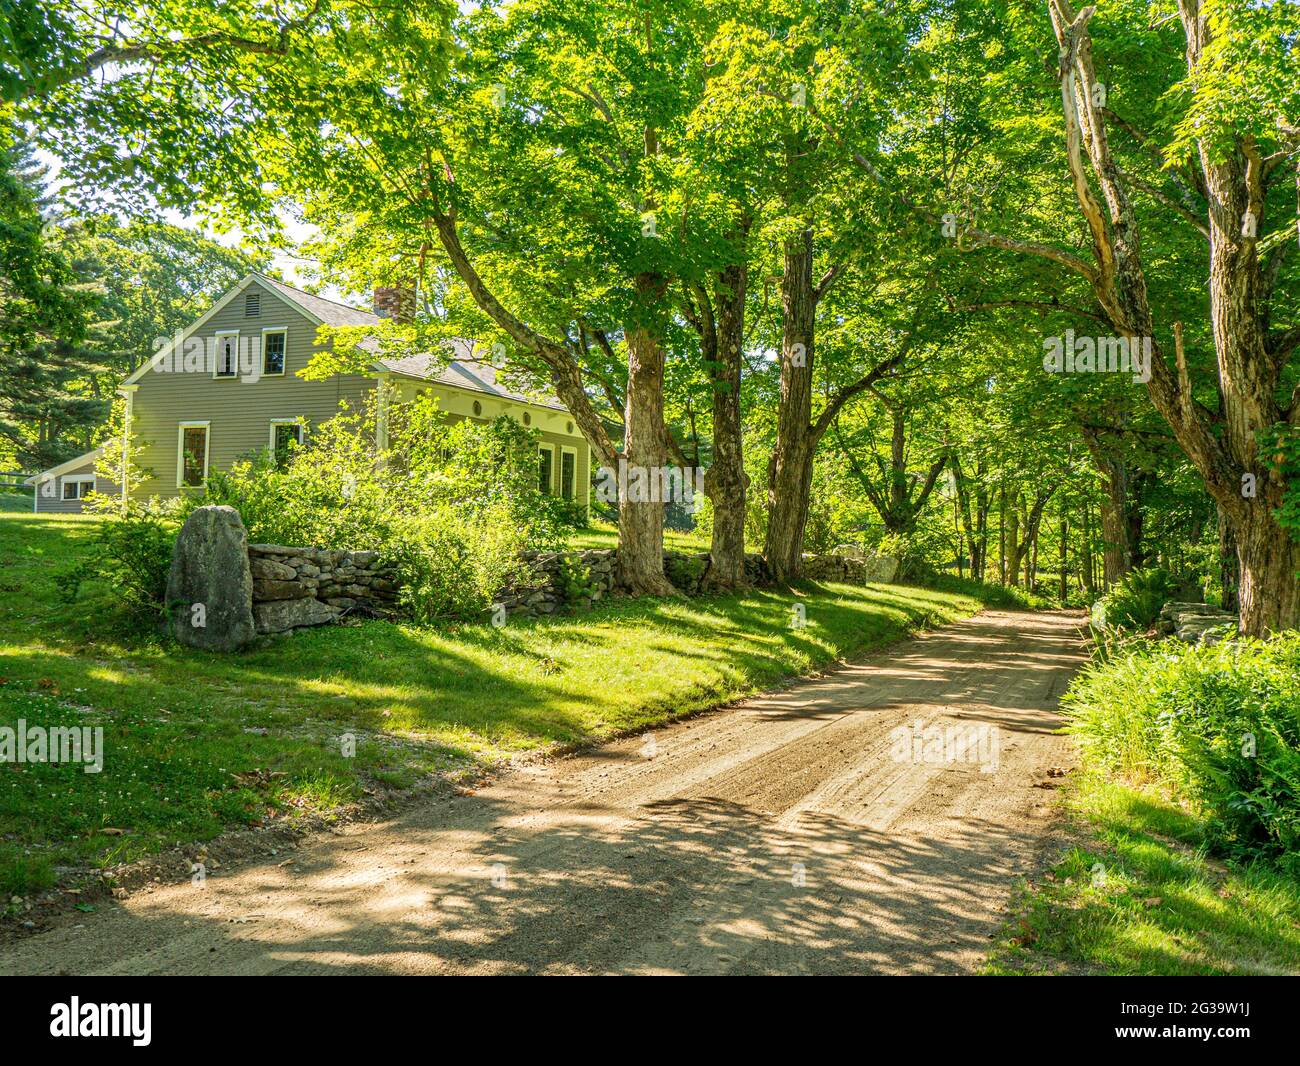 An old house on a dirt road in Petersham, Massachusetts Stock Photo